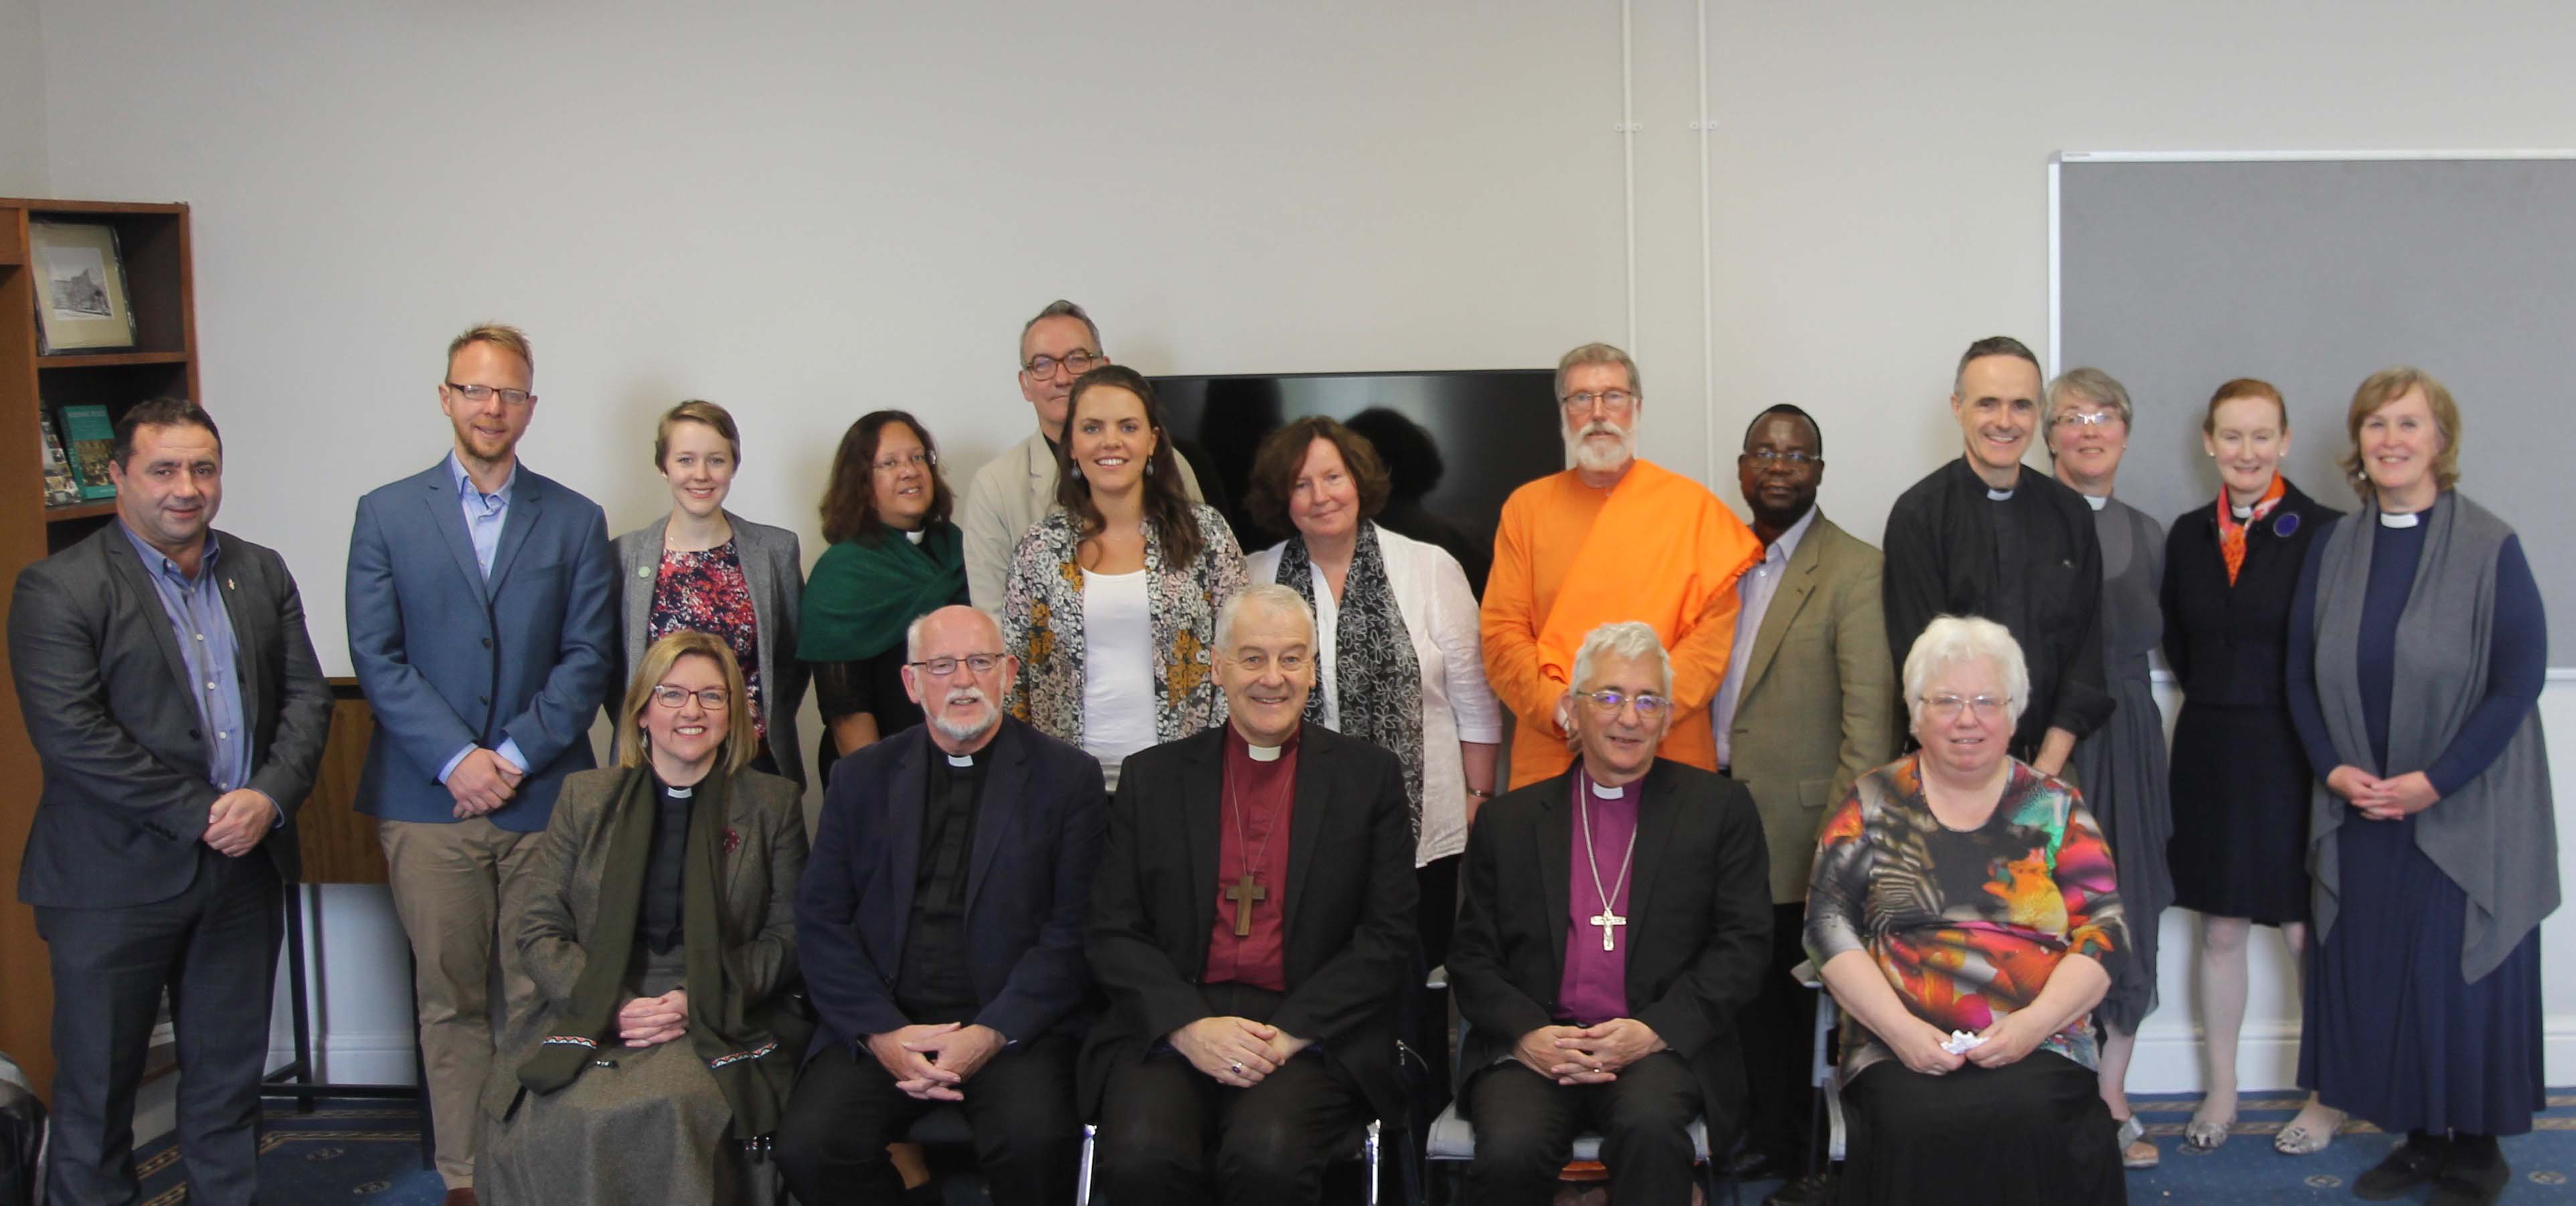 Some of the participants in the inaugural meeting of NIFENAC in Dublin: Back row:  Adrian Cristae (Dublin City Interfaith Forum); Dr Peter Admirand (Centre for Interreligious Dialogue, DCU); Kat Brealey (Church of England); Revd Tricia Hillas (Church of England); Revd Richard Sudworth (Church of England); Katie Hodkinson (Lambeth Palace); Dr Ethna Reagan (School of Theology, Philosophy and Music, DCU); Swami Purnananda Puri (Dublin City Interfaith Forum); Revd Dr John Kafwanka (Anglican Communion Office); Revd Dr Ainsley Griffiths (Church in Wales); Revd Prof Anne Lodge (Church of Ireland Centre, DCU); Revd Flora Winfield (Church of England); Revd Bonnie Hills-Evans (Church of England).  Front row: Revd Susanne Cousins (Church of Ireland); Revd Aled Edwards (Church in Wales); Archbishop Michael Jackson (Church of Ireland); Bishop Michael Ipgrave (Church of England); Clare Amos (Diocese of Europe).